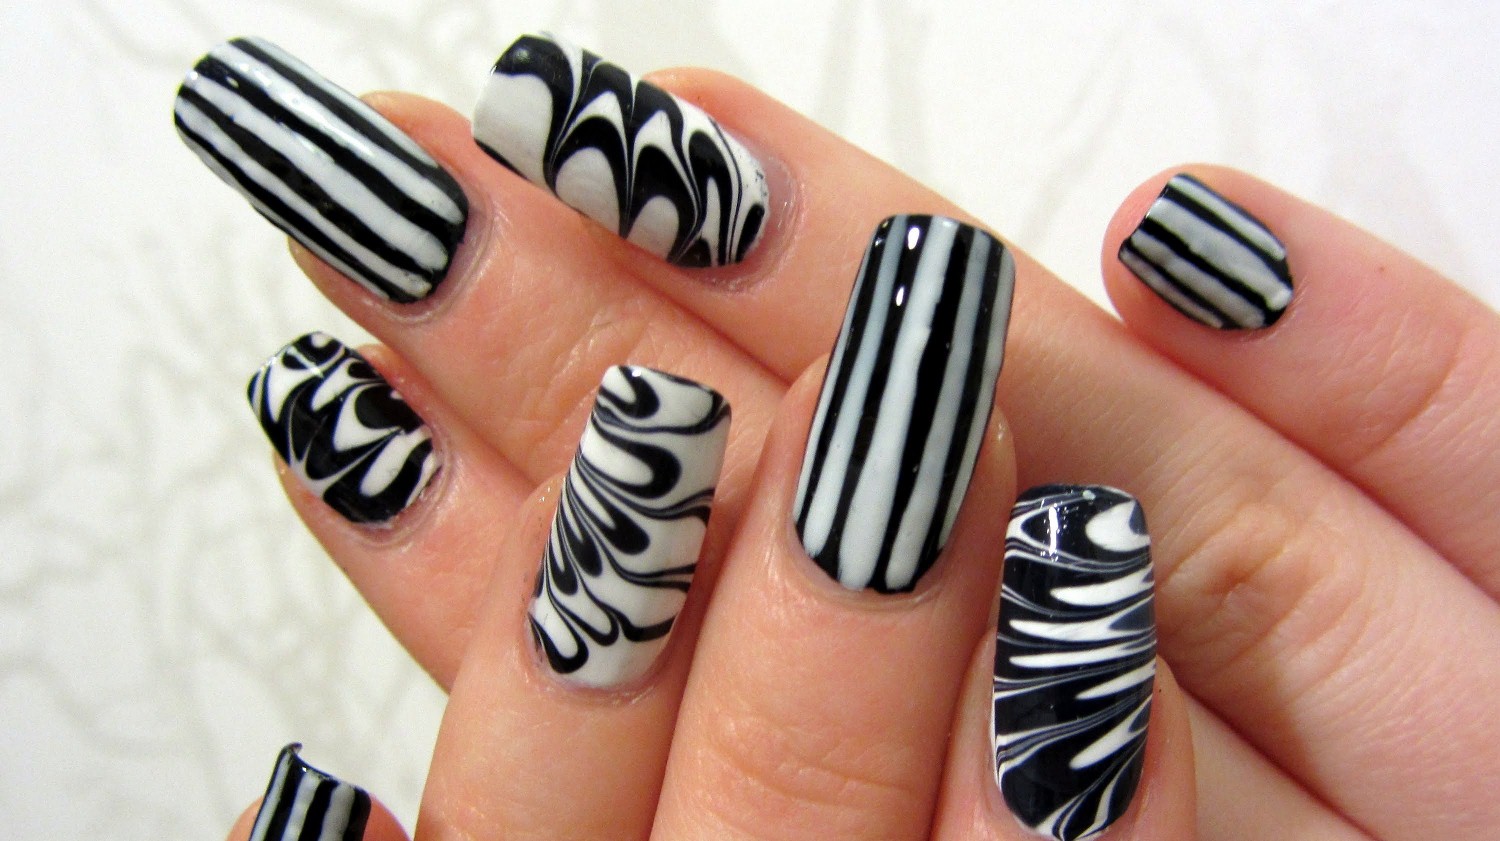 5. Elegant Dotted and Striped Nail Designs - wide 8